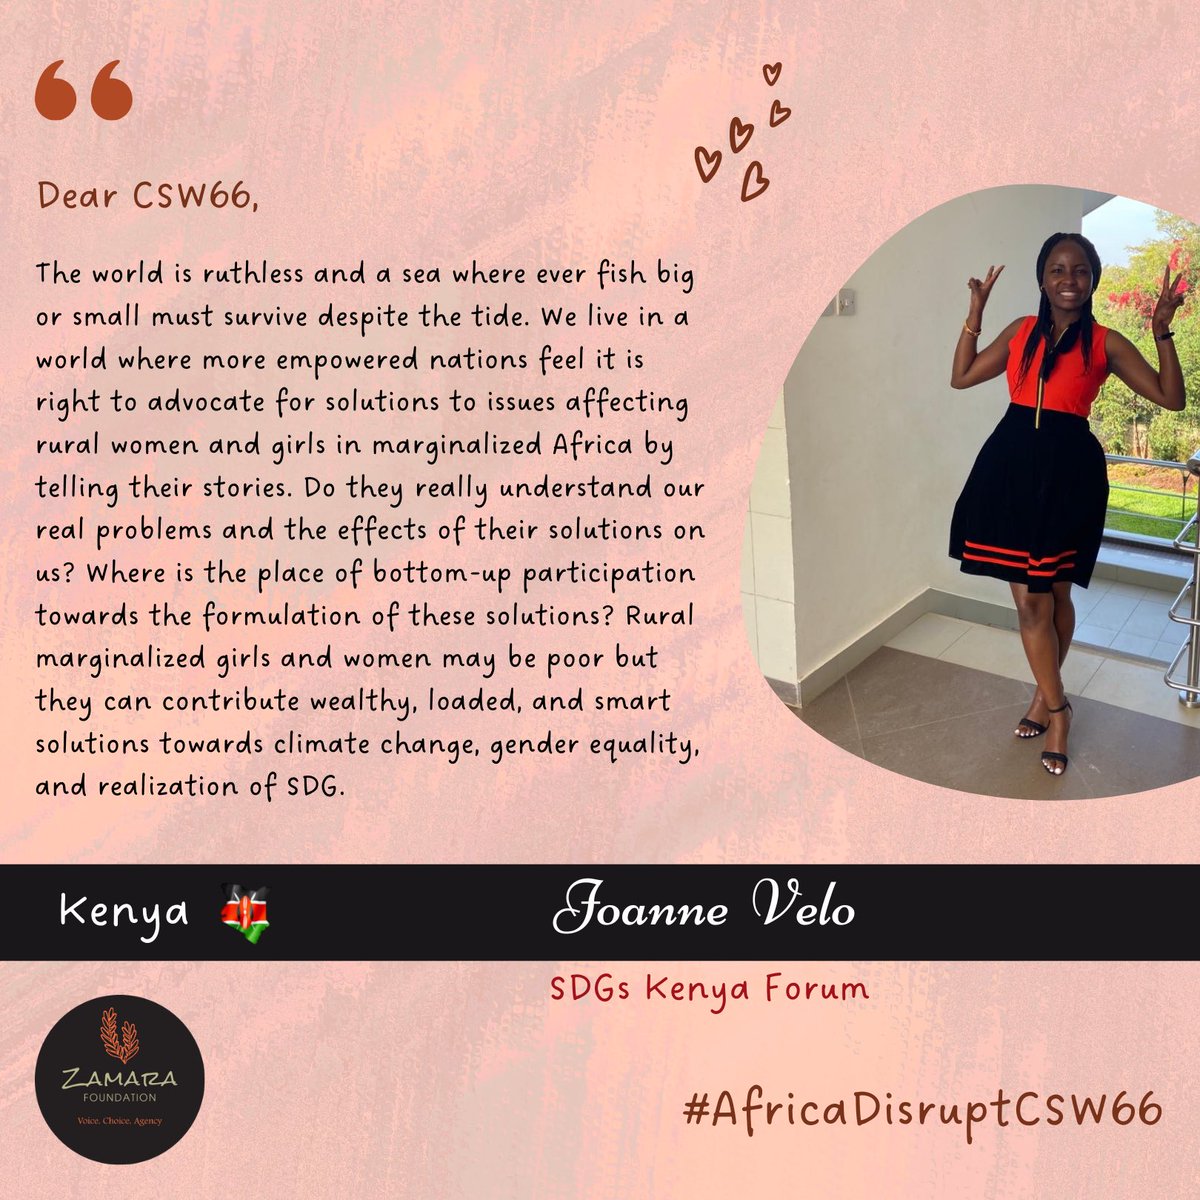 Dear #CSW66,

'Rural marginalized girls and women may be poor but they can contribute wealthy, loaded, and smart solutions towards climate change, gender equality, and realization of SDG.' -Joanne Velo

#AfricaDisruptCSW66 
#CSW66Africa 

@SDGsKenyaForum